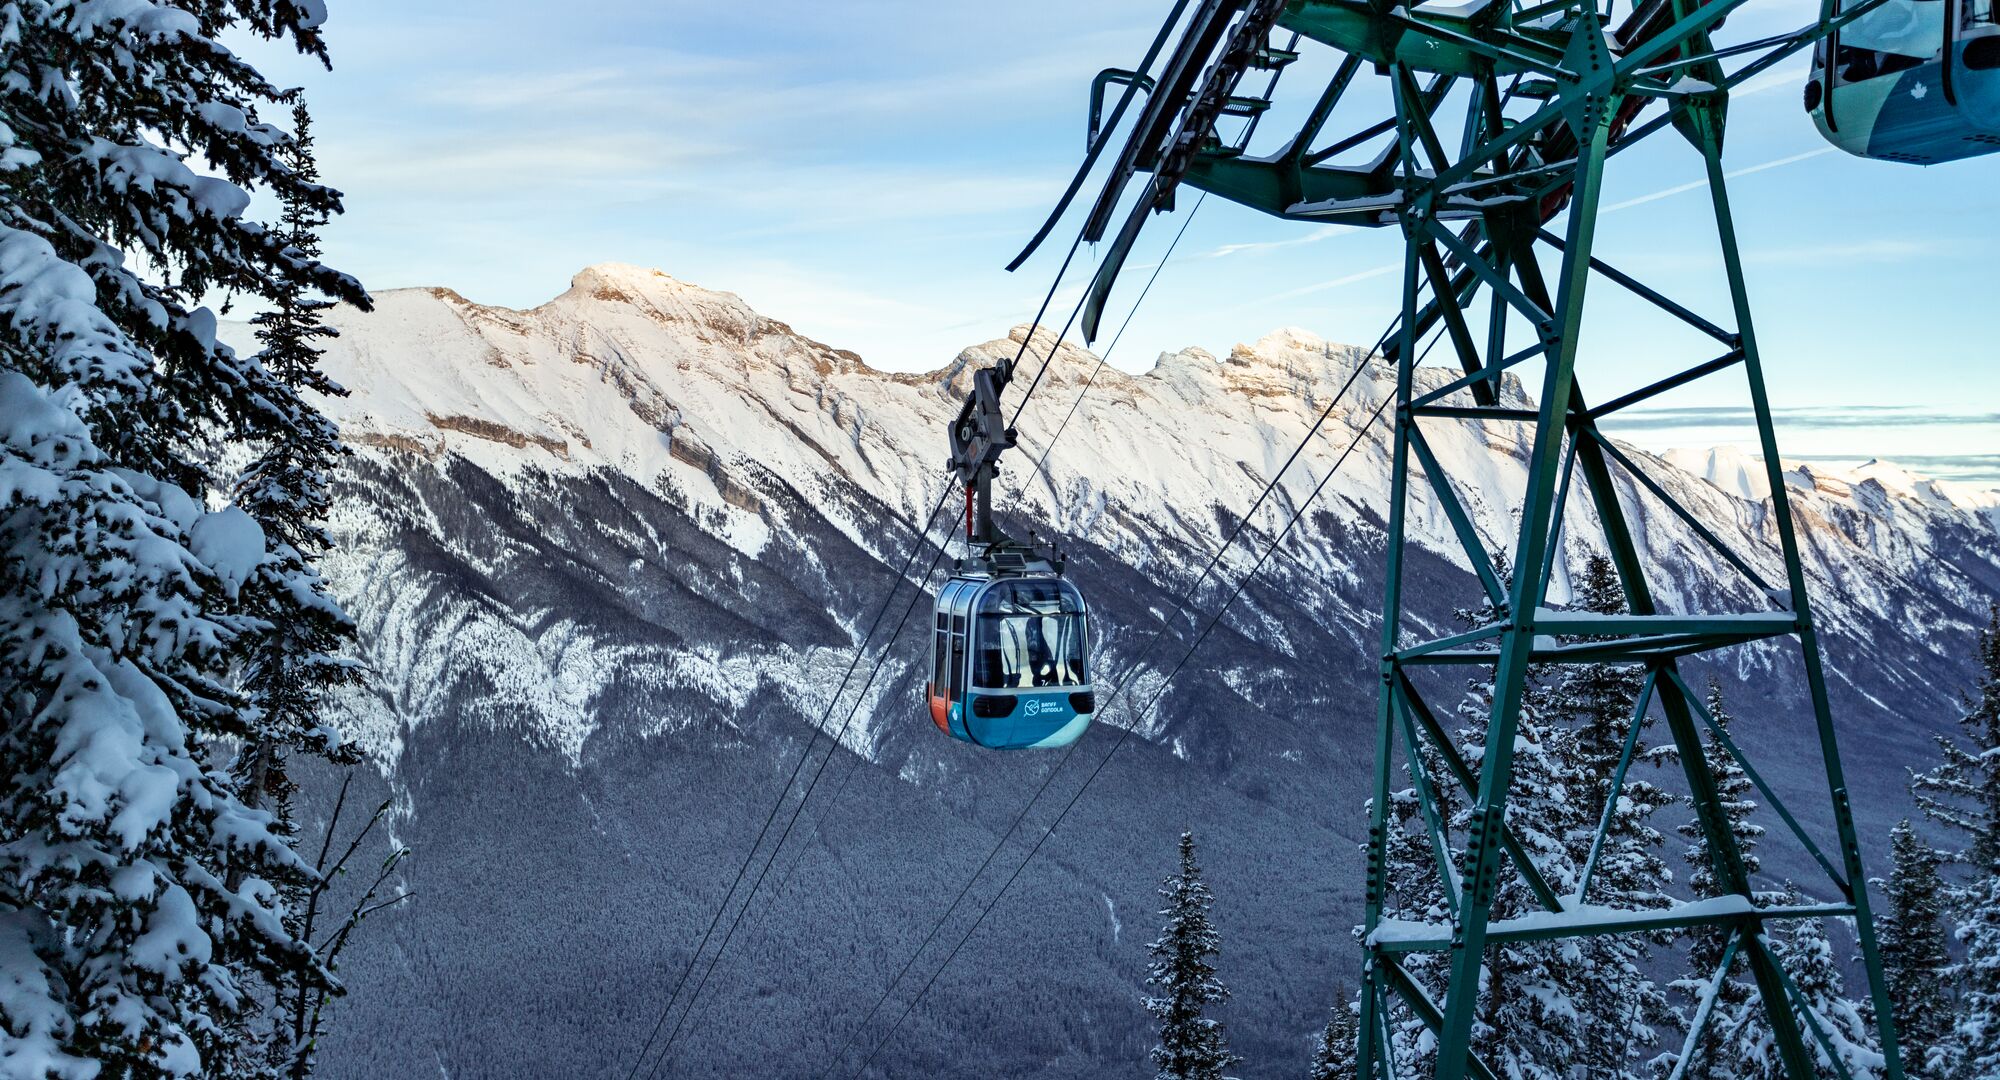 A gondola car travels up towards the top of a snow covered Sulphur Mountain with a clear blue sky above